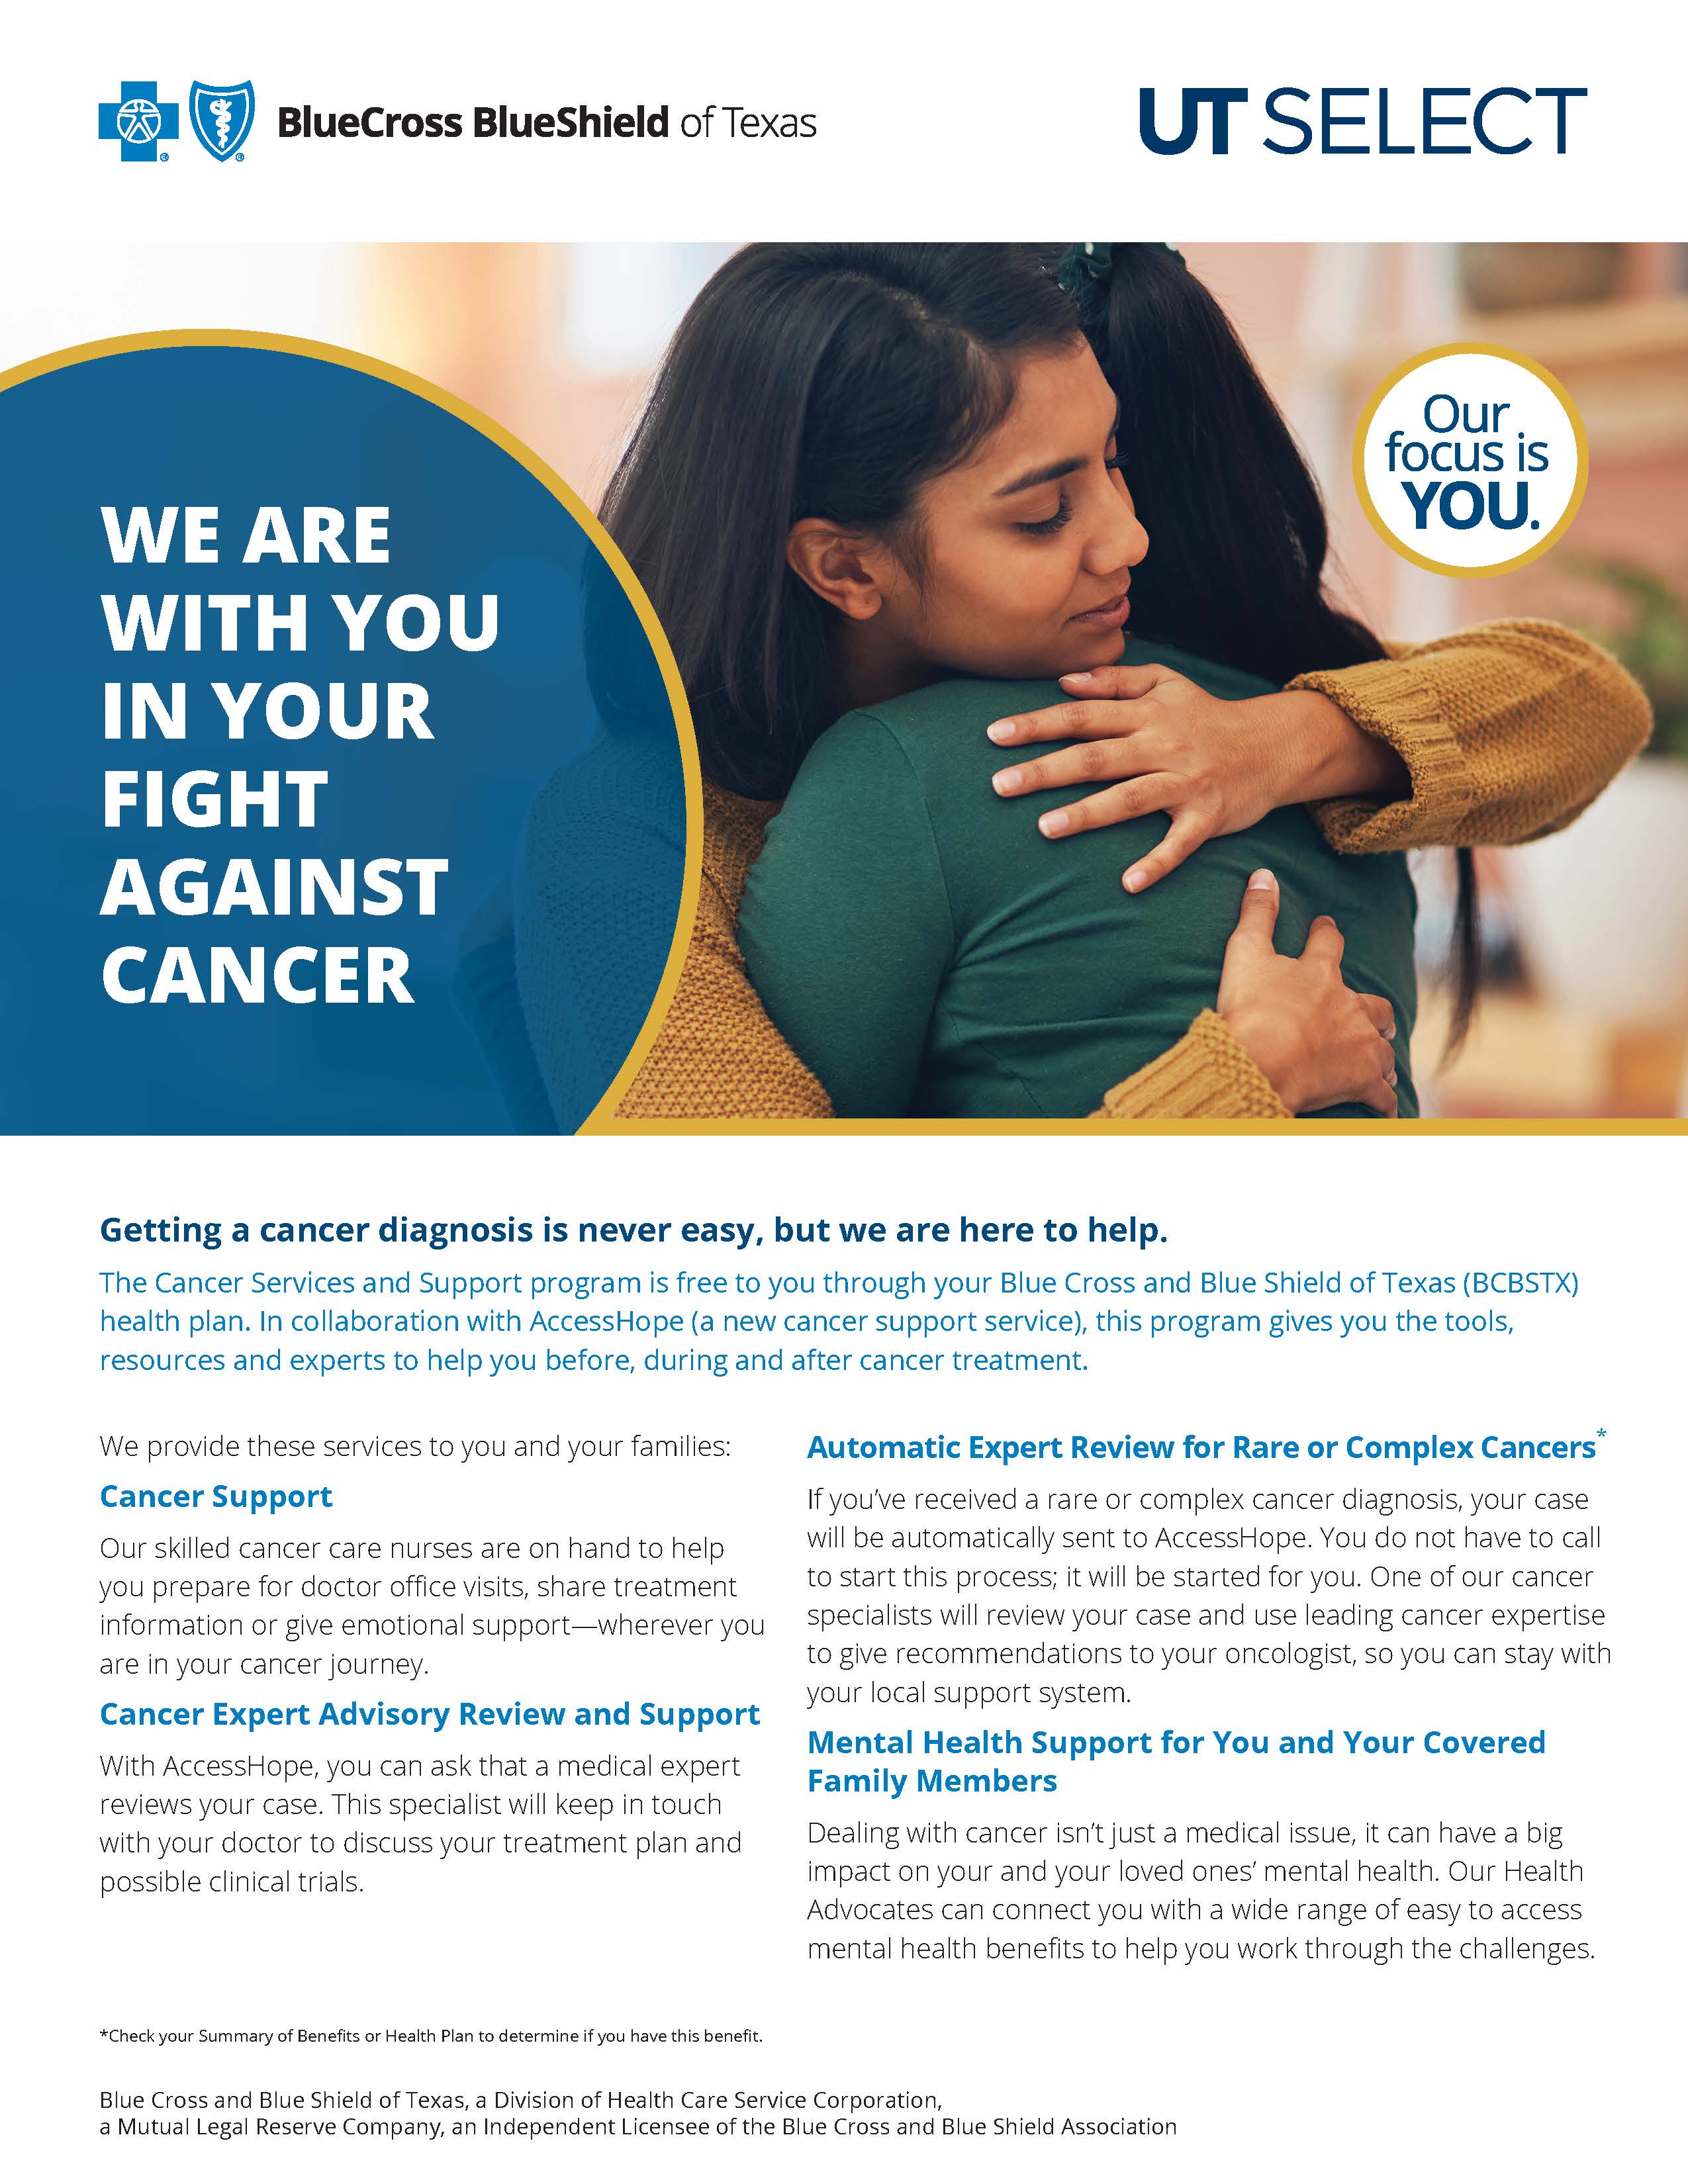 UT SELECT Cancer Services and Support flyer